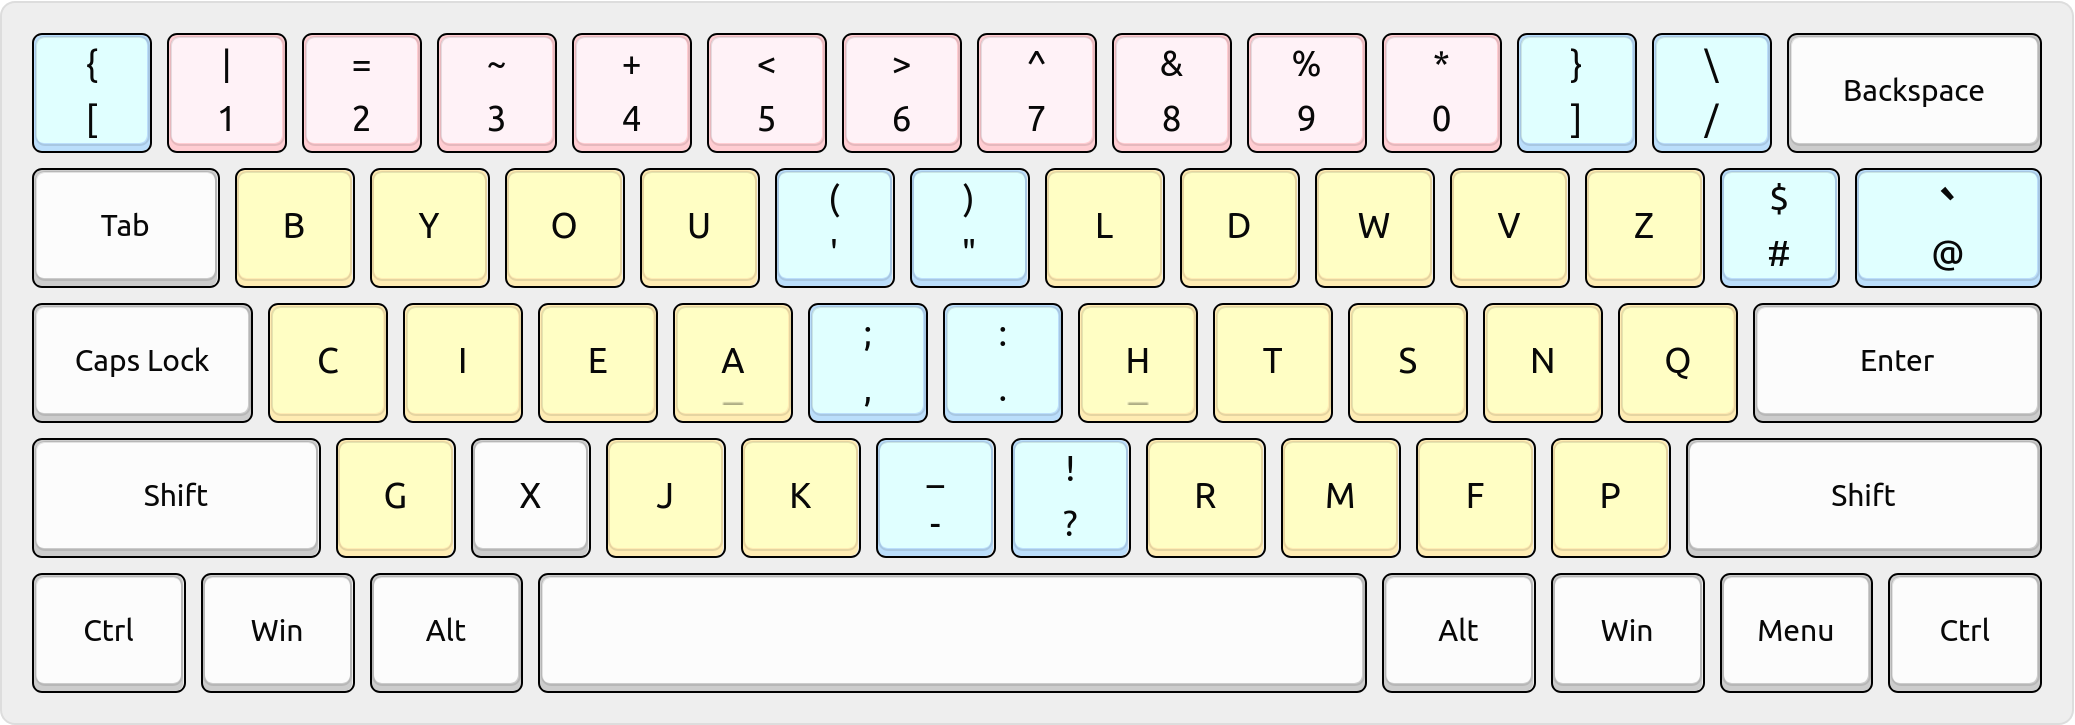 Rendering of this layout on a standard 60% keyboard.